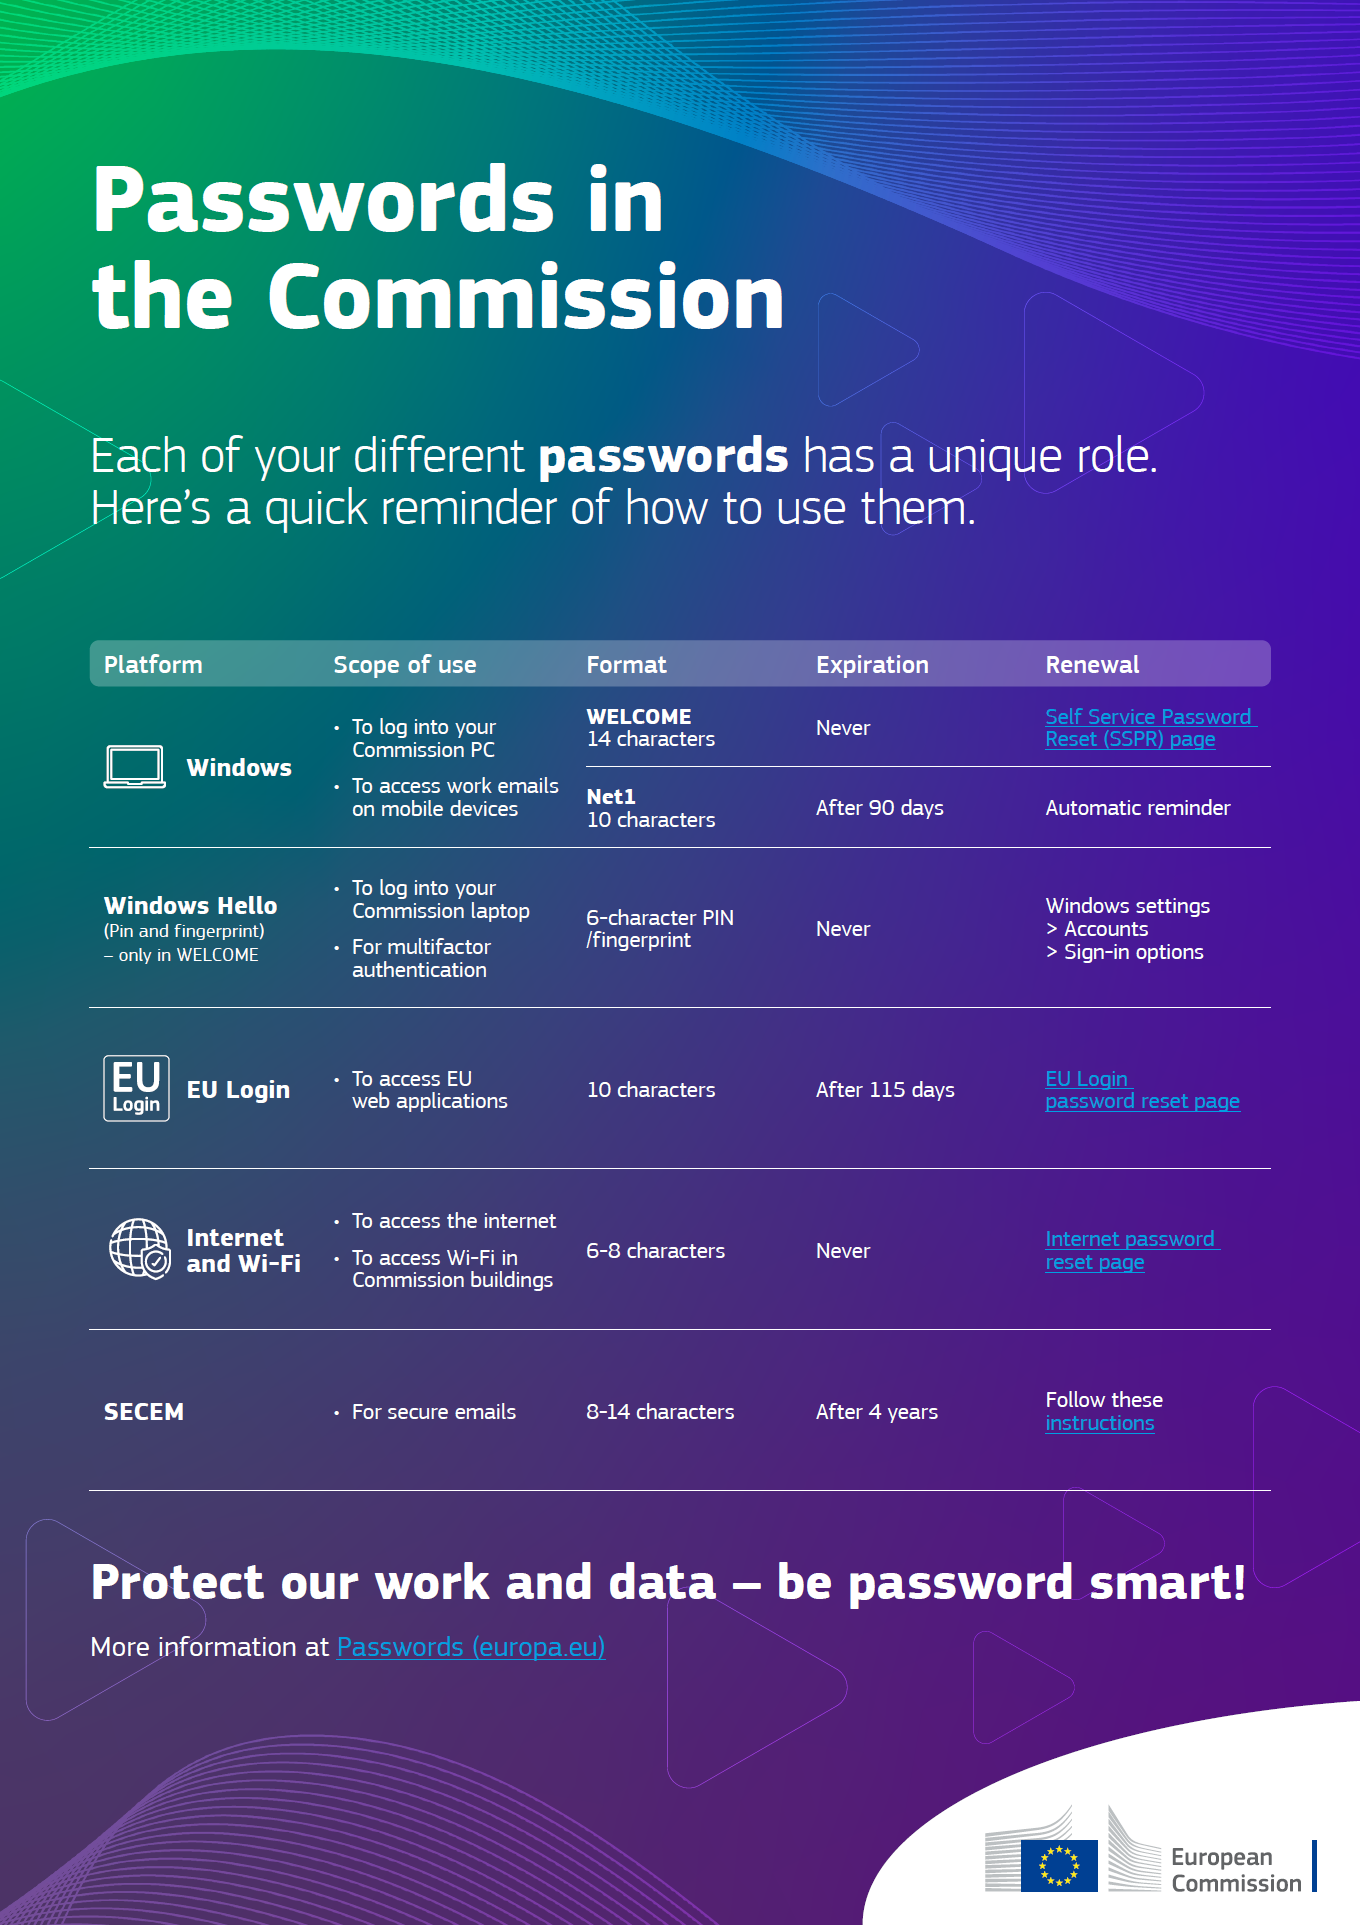 Passwords_in_the_Commission_infographic_MPCw4FXG2yqTheH4Nu9S3LCLg_96860.png